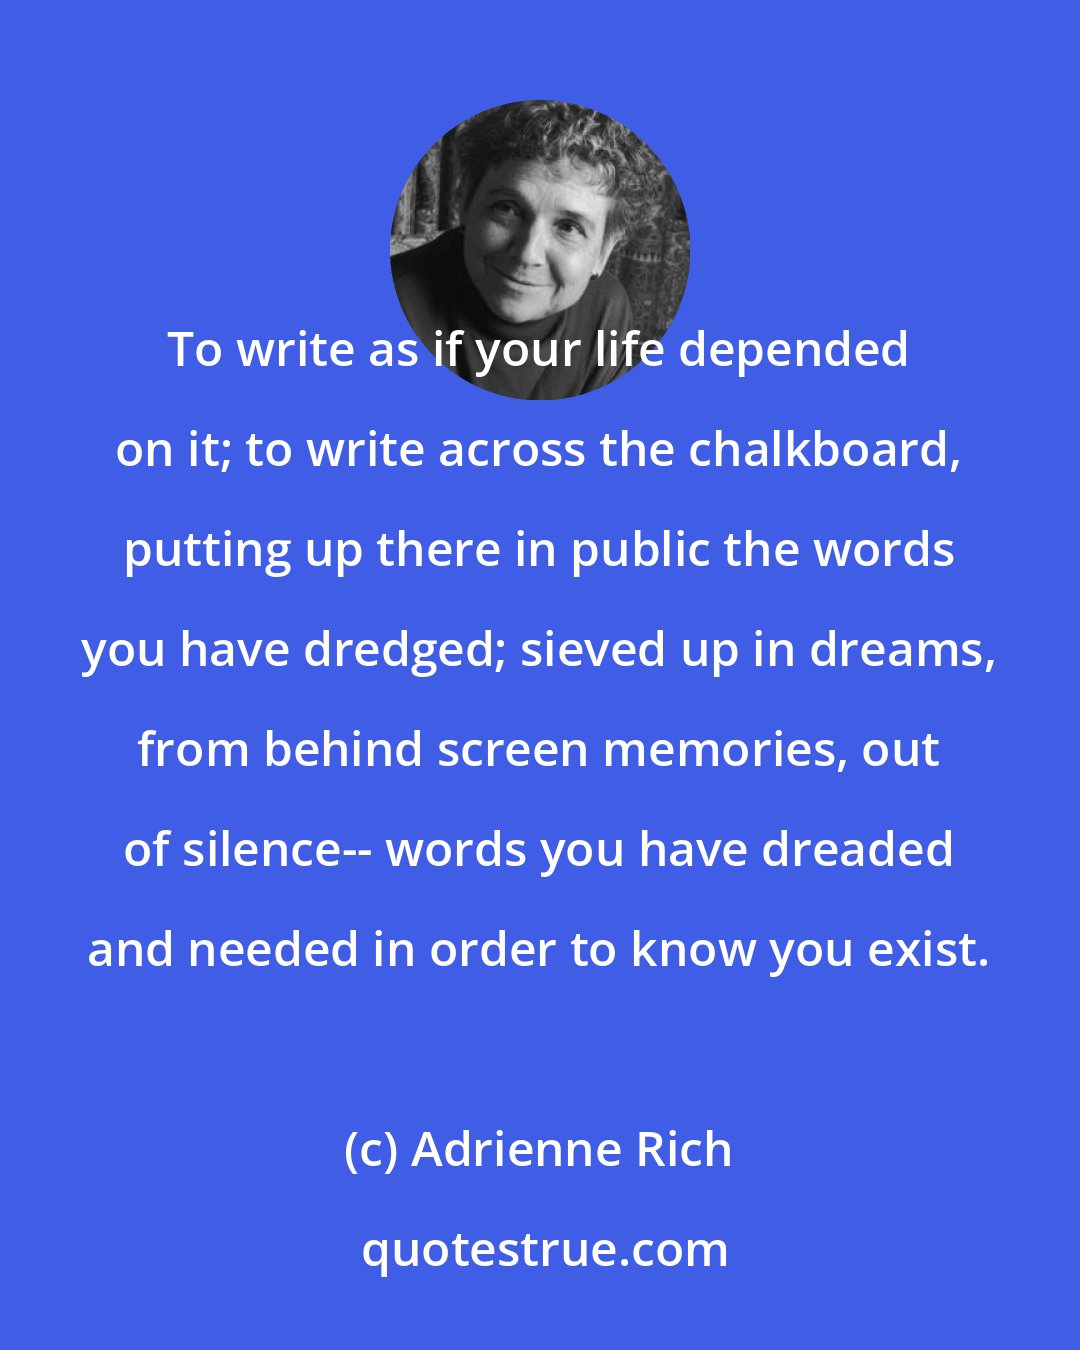 Adrienne Rich: To write as if your life depended on it; to write across the chalkboard, putting up there in public the words you have dredged; sieved up in dreams, from behind screen memories, out of silence-- words you have dreaded and needed in order to know you exist.